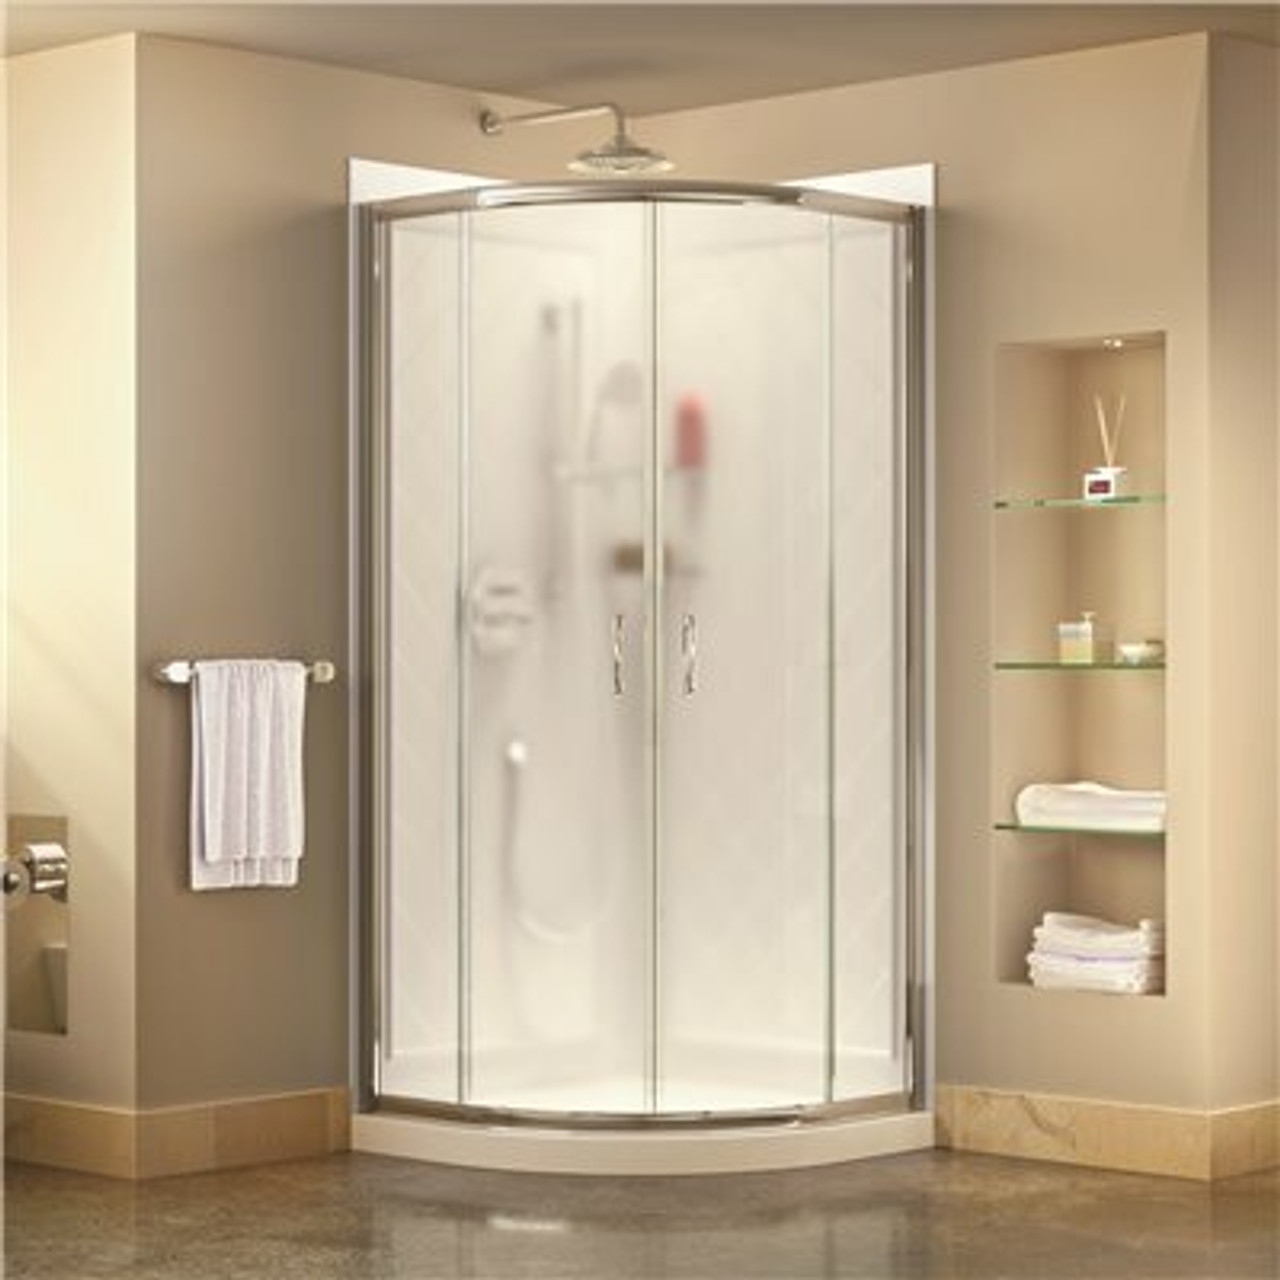 Dreamline Prime 36 In. X 36 In. X 76.75 In. H Corner Framed Sliding Shower Enclosure In Chrome With Base And Back Walls - 204477667